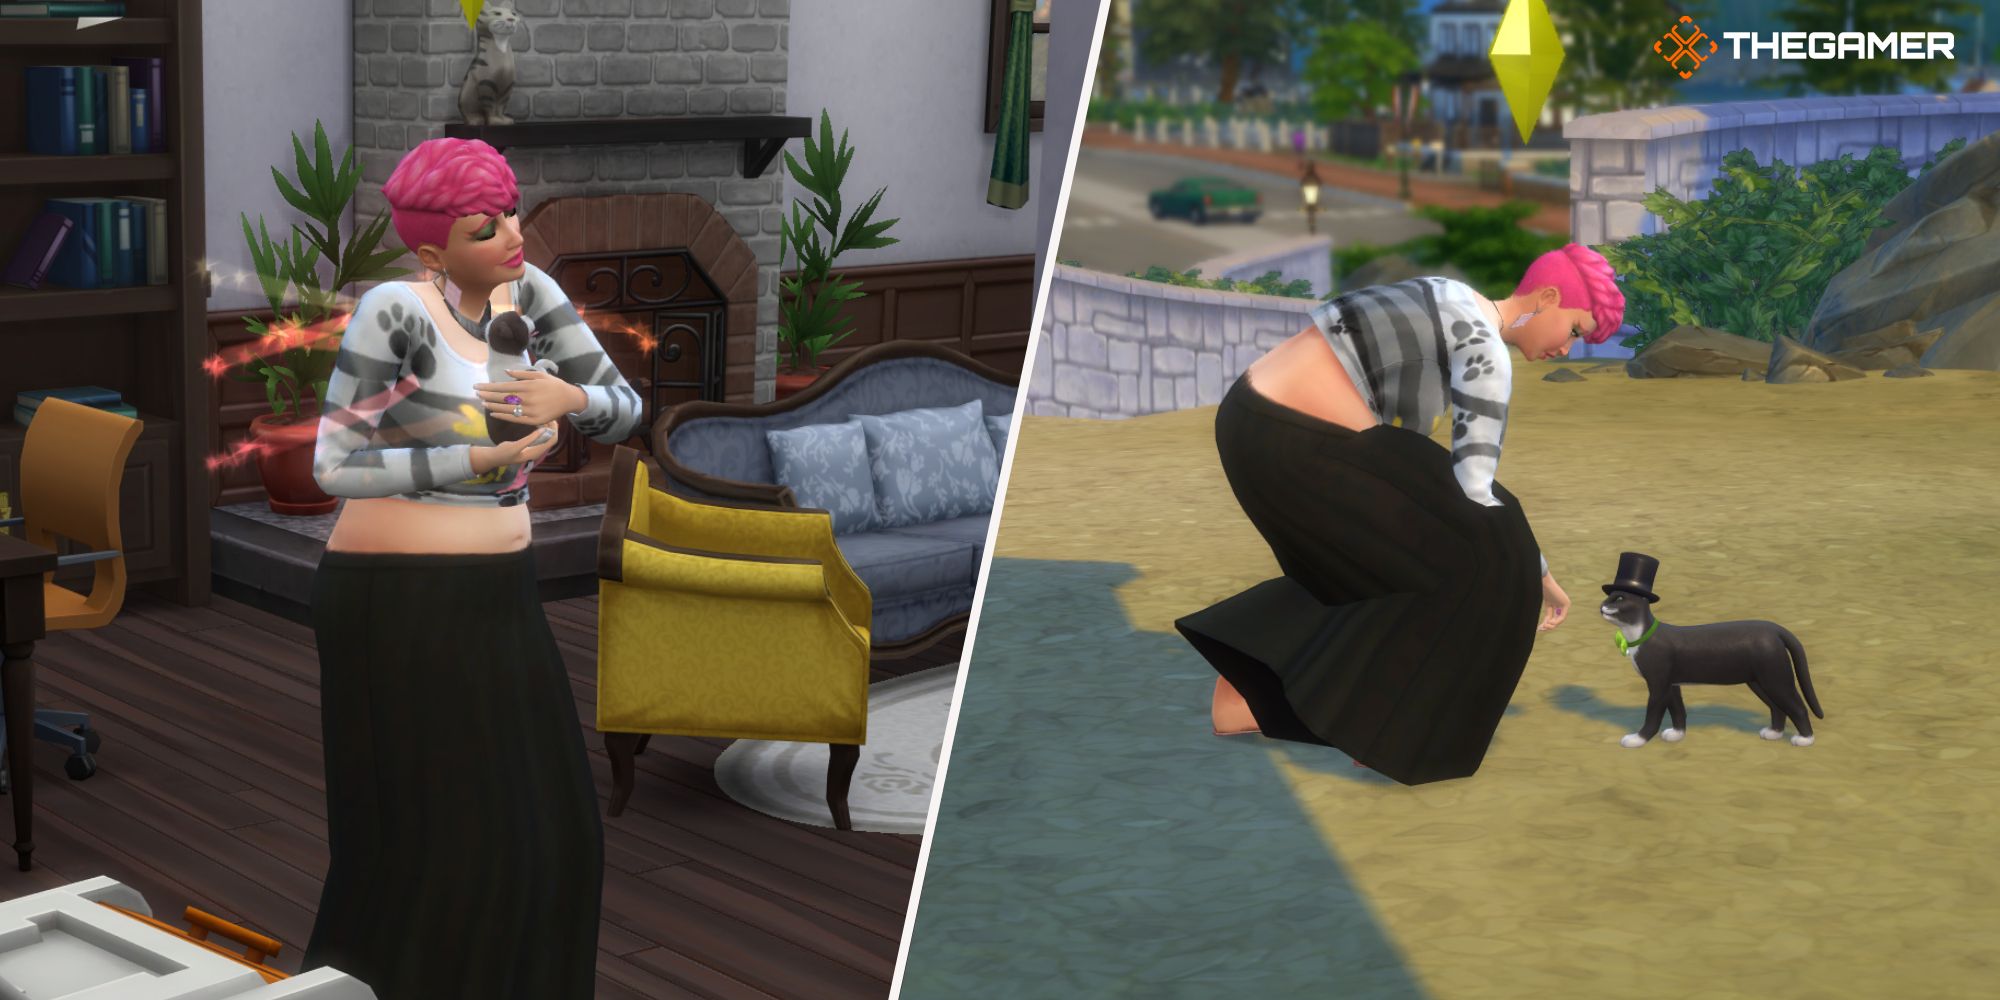 The Sims 4 Cats & Dogs: Left, holding pet after adopting it from agency, right: meeting stray black cat